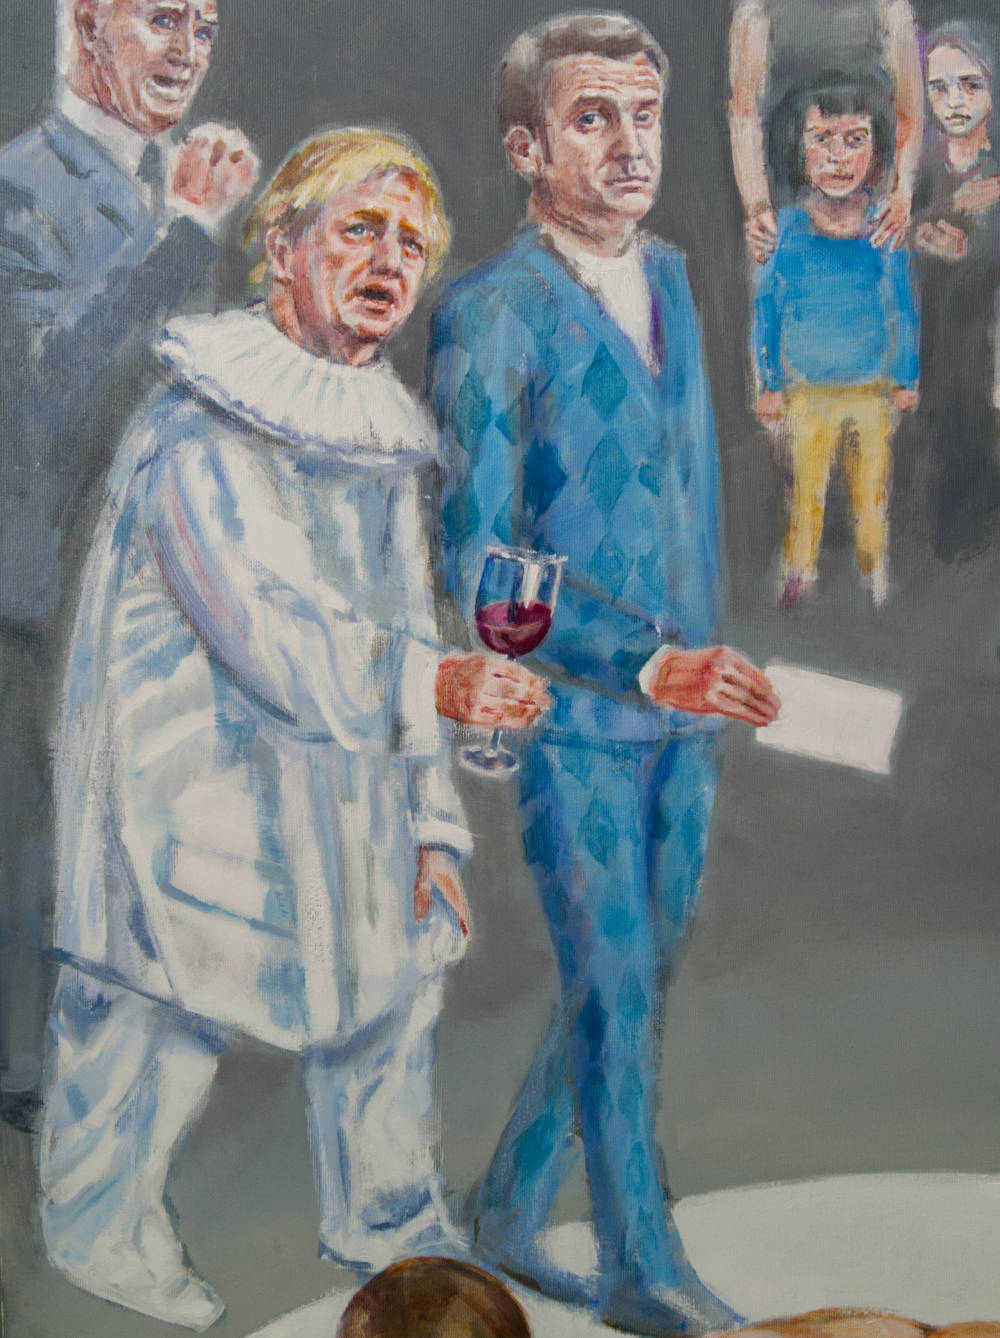 boris johnson and macron in my painting The Wrestlers